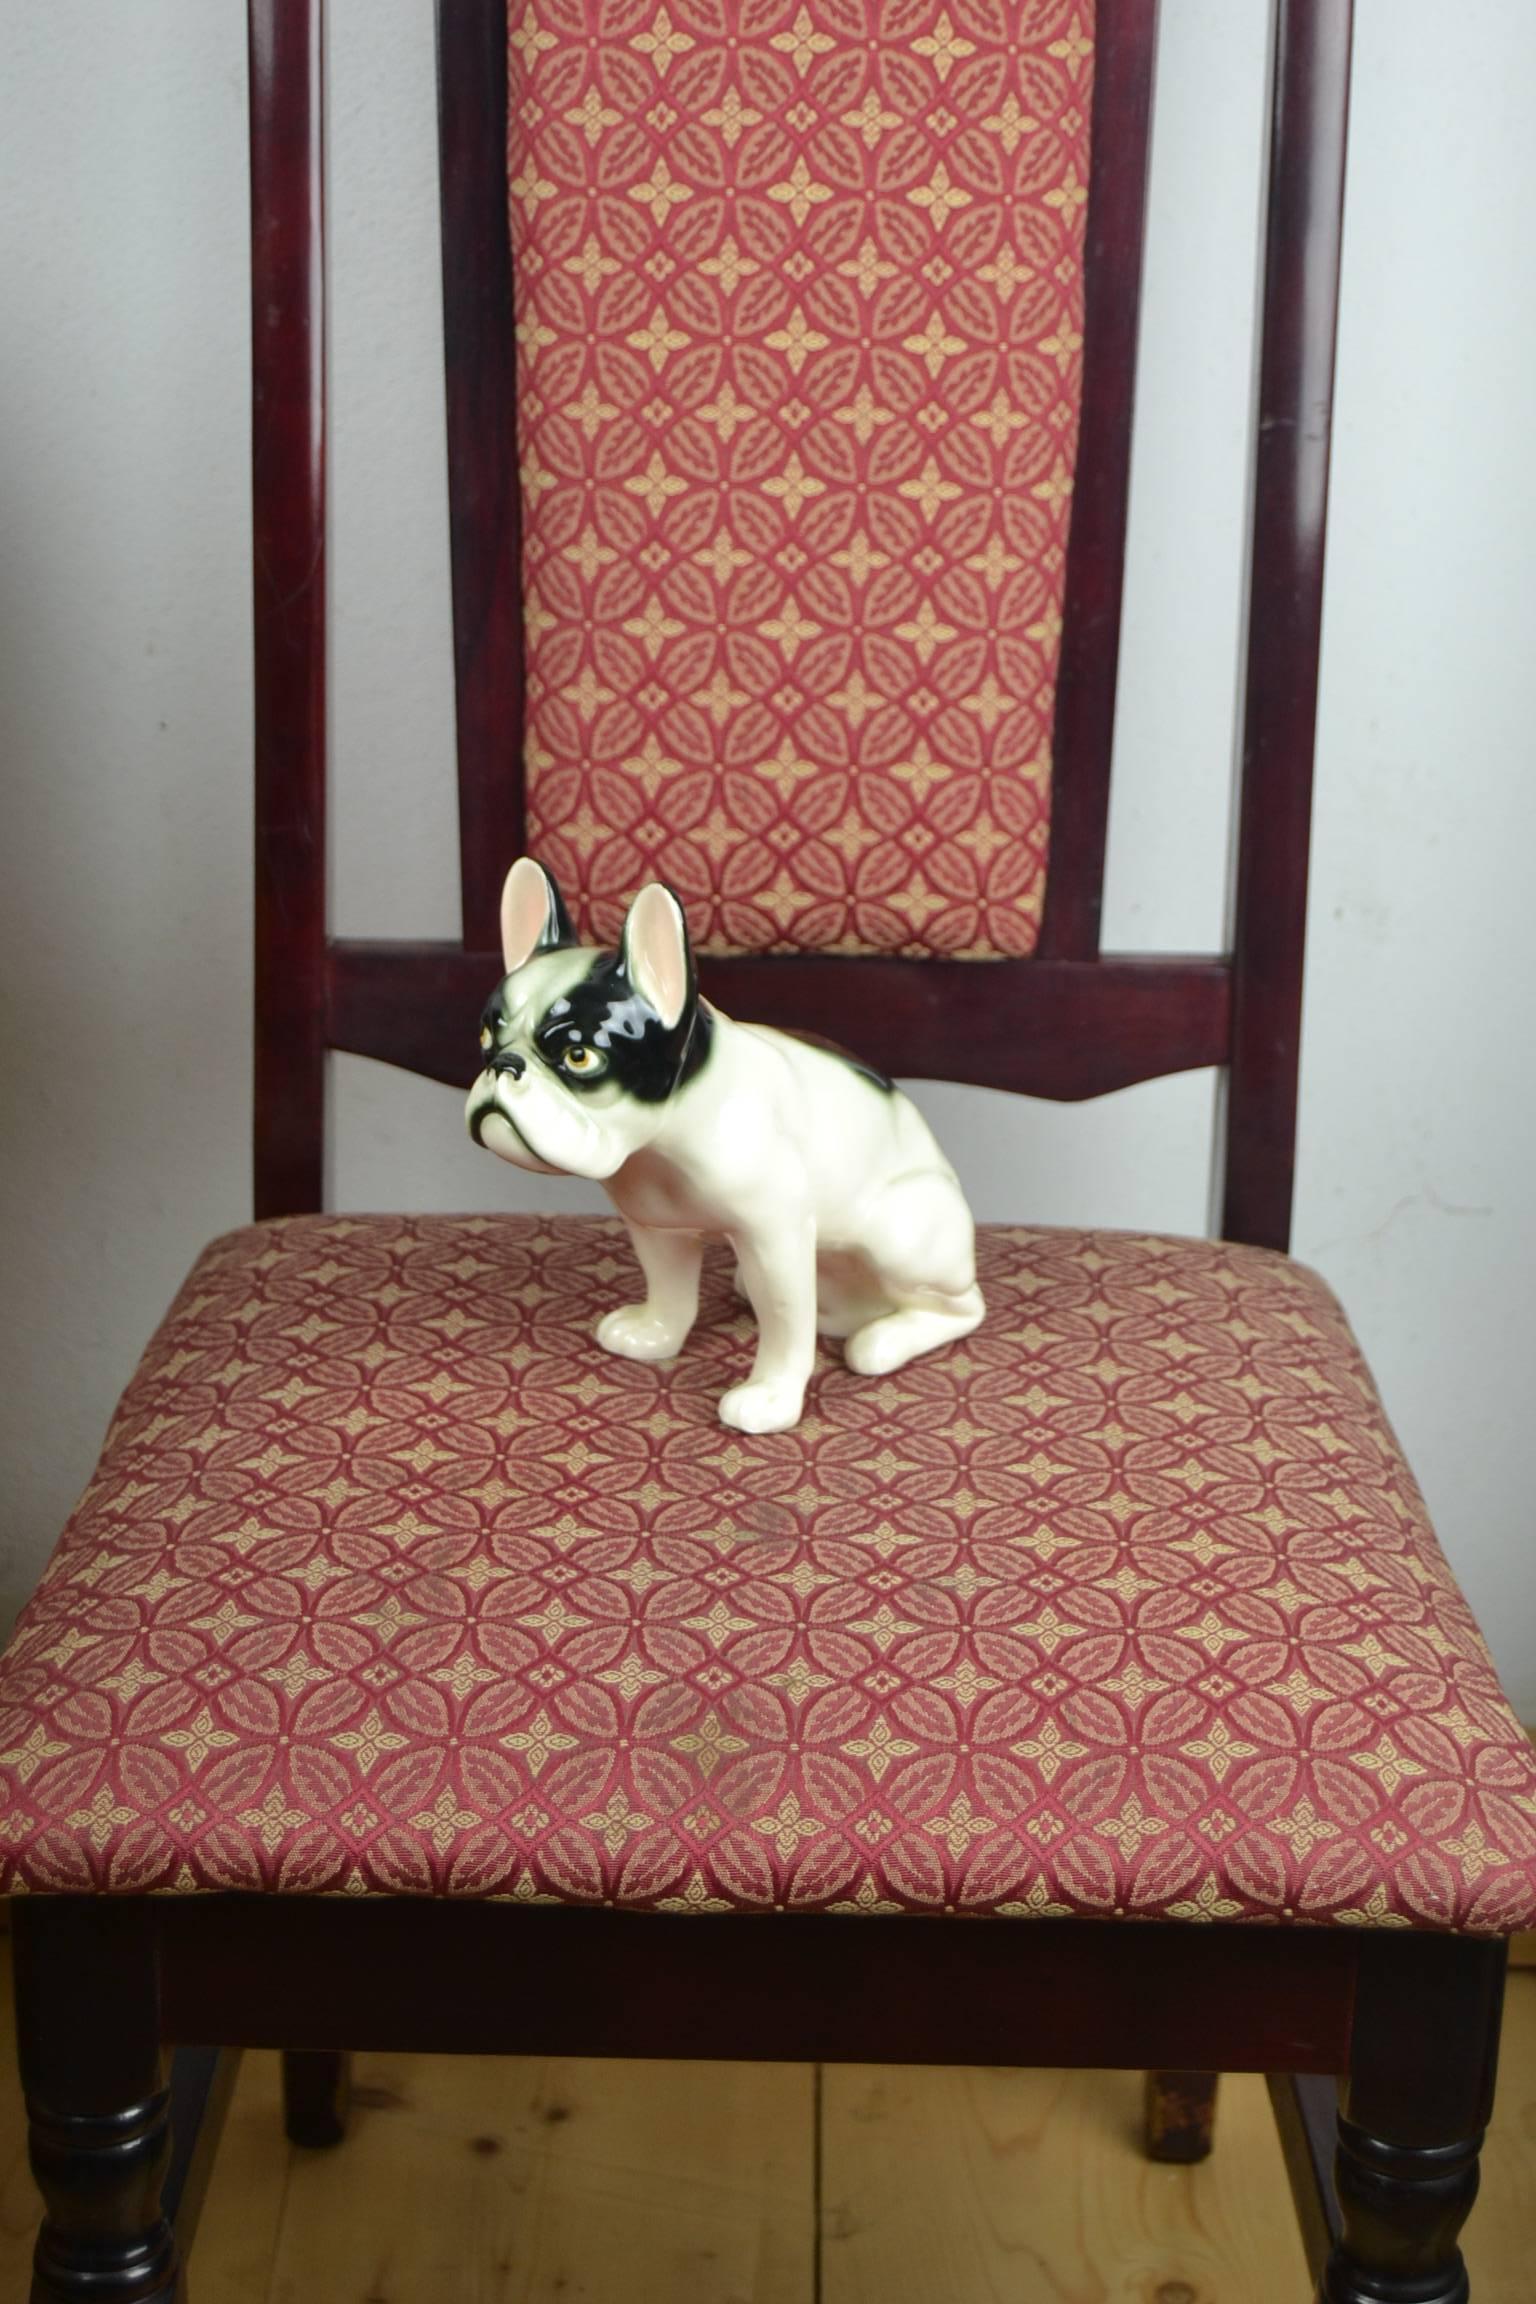 Antique big porcelain sitting dog figurine of a Grumpy French Bulldog or Boston Terriër.
Beautiful Art Deco porcelain statue from the 1930s made in Germany. 
Minor chip on one ear.
Numbered figurine.
Manufacturer unknown.

